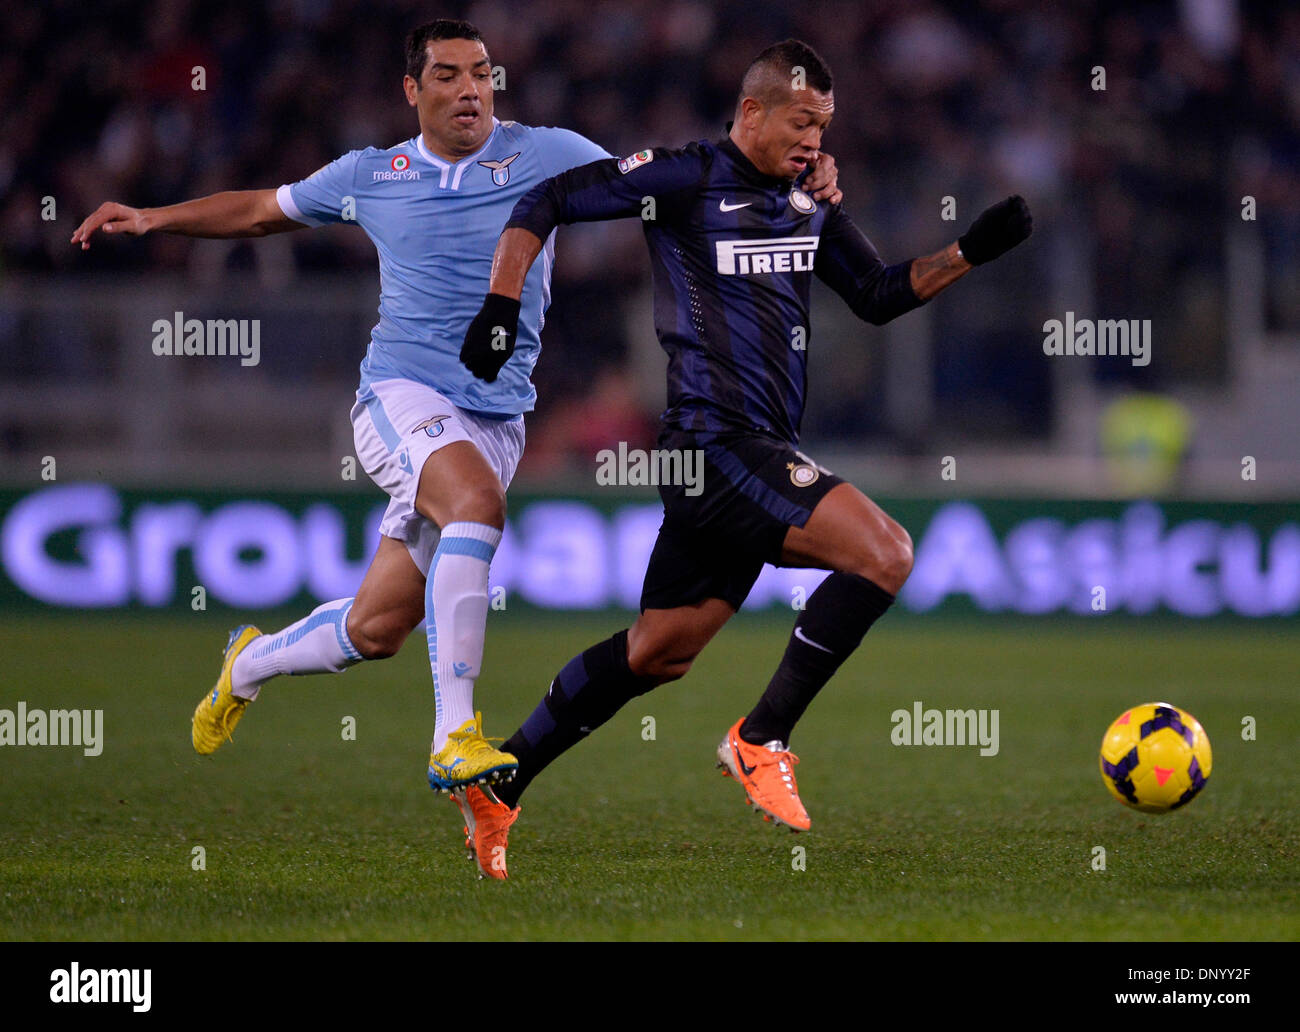 Rome, Italy. 6th Jan, 2014. Andre Dias (L) of Lazio vies with Fredy Guarin of Inter Milan during their Italian Serie A soccer match in Rome, Italy, Jan 6, 2014. Lazio won 1-0. Credit:  Alberto Lingria/Xinhua/Alamy Live News Stock Photo